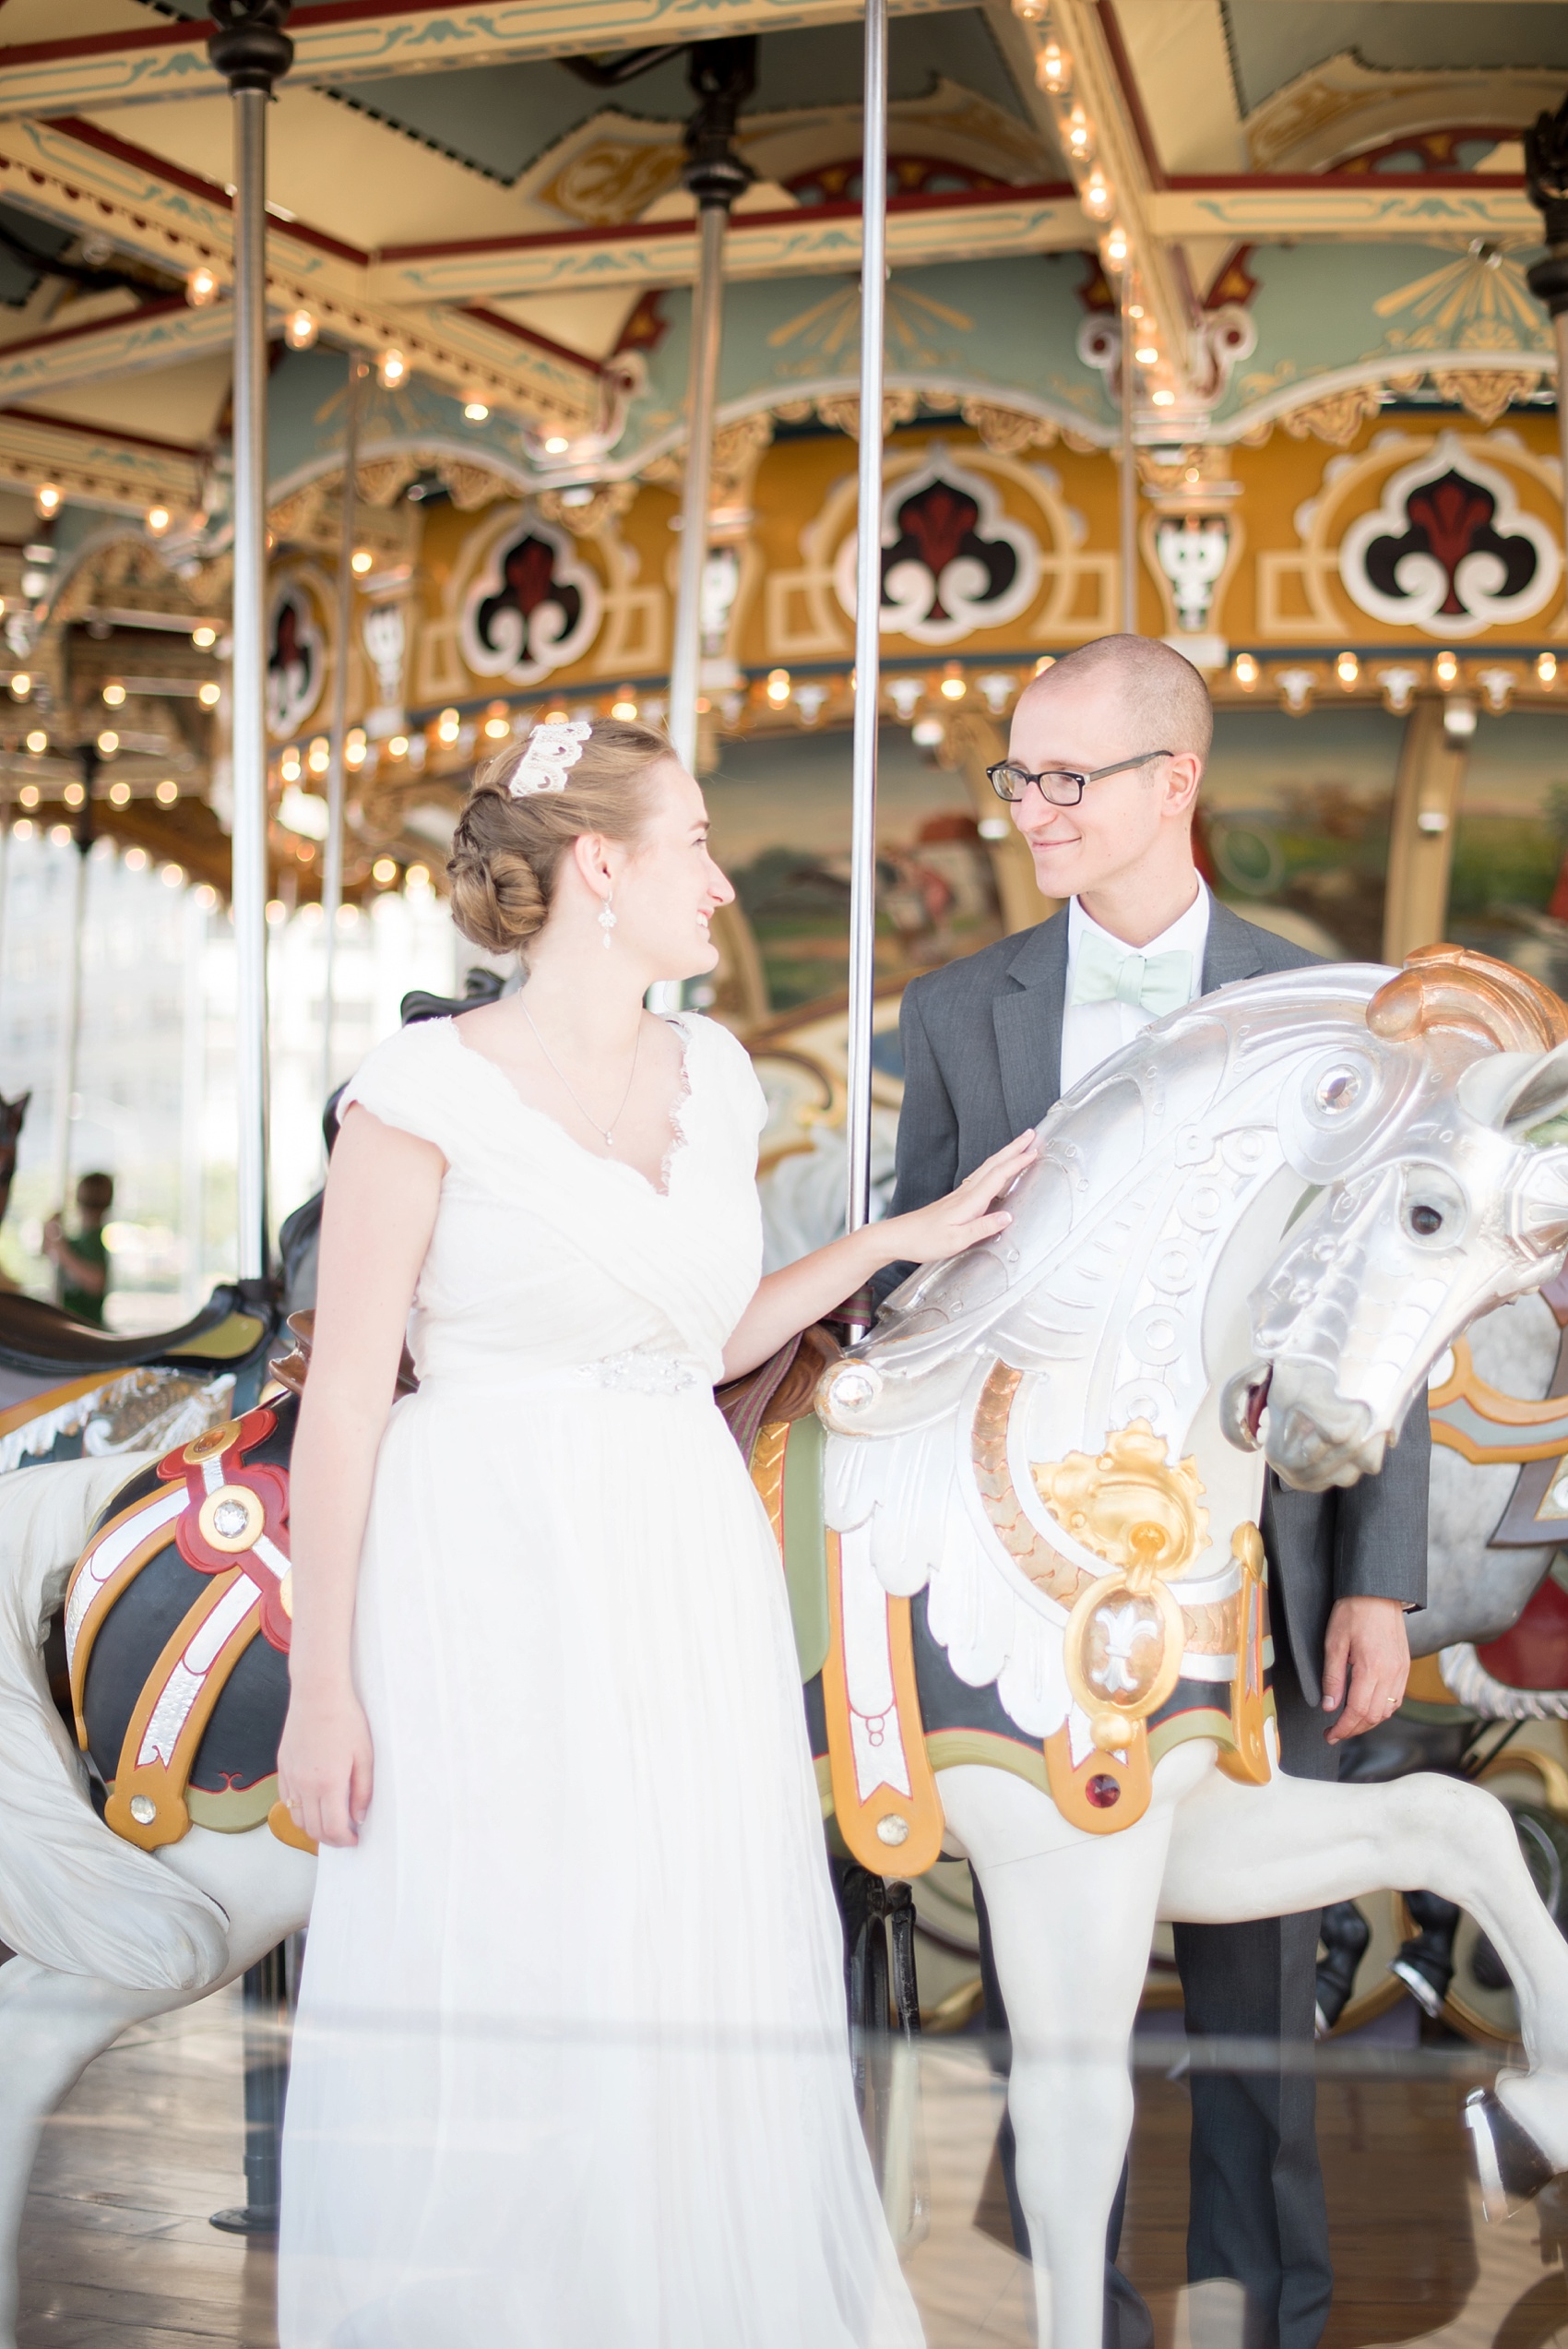 Bride and groom photo in DUMBO, Brooklyn Bridge Park, Jane's Carousel. Photos by Mikkel Paige Photography, NYC wedding photographer.